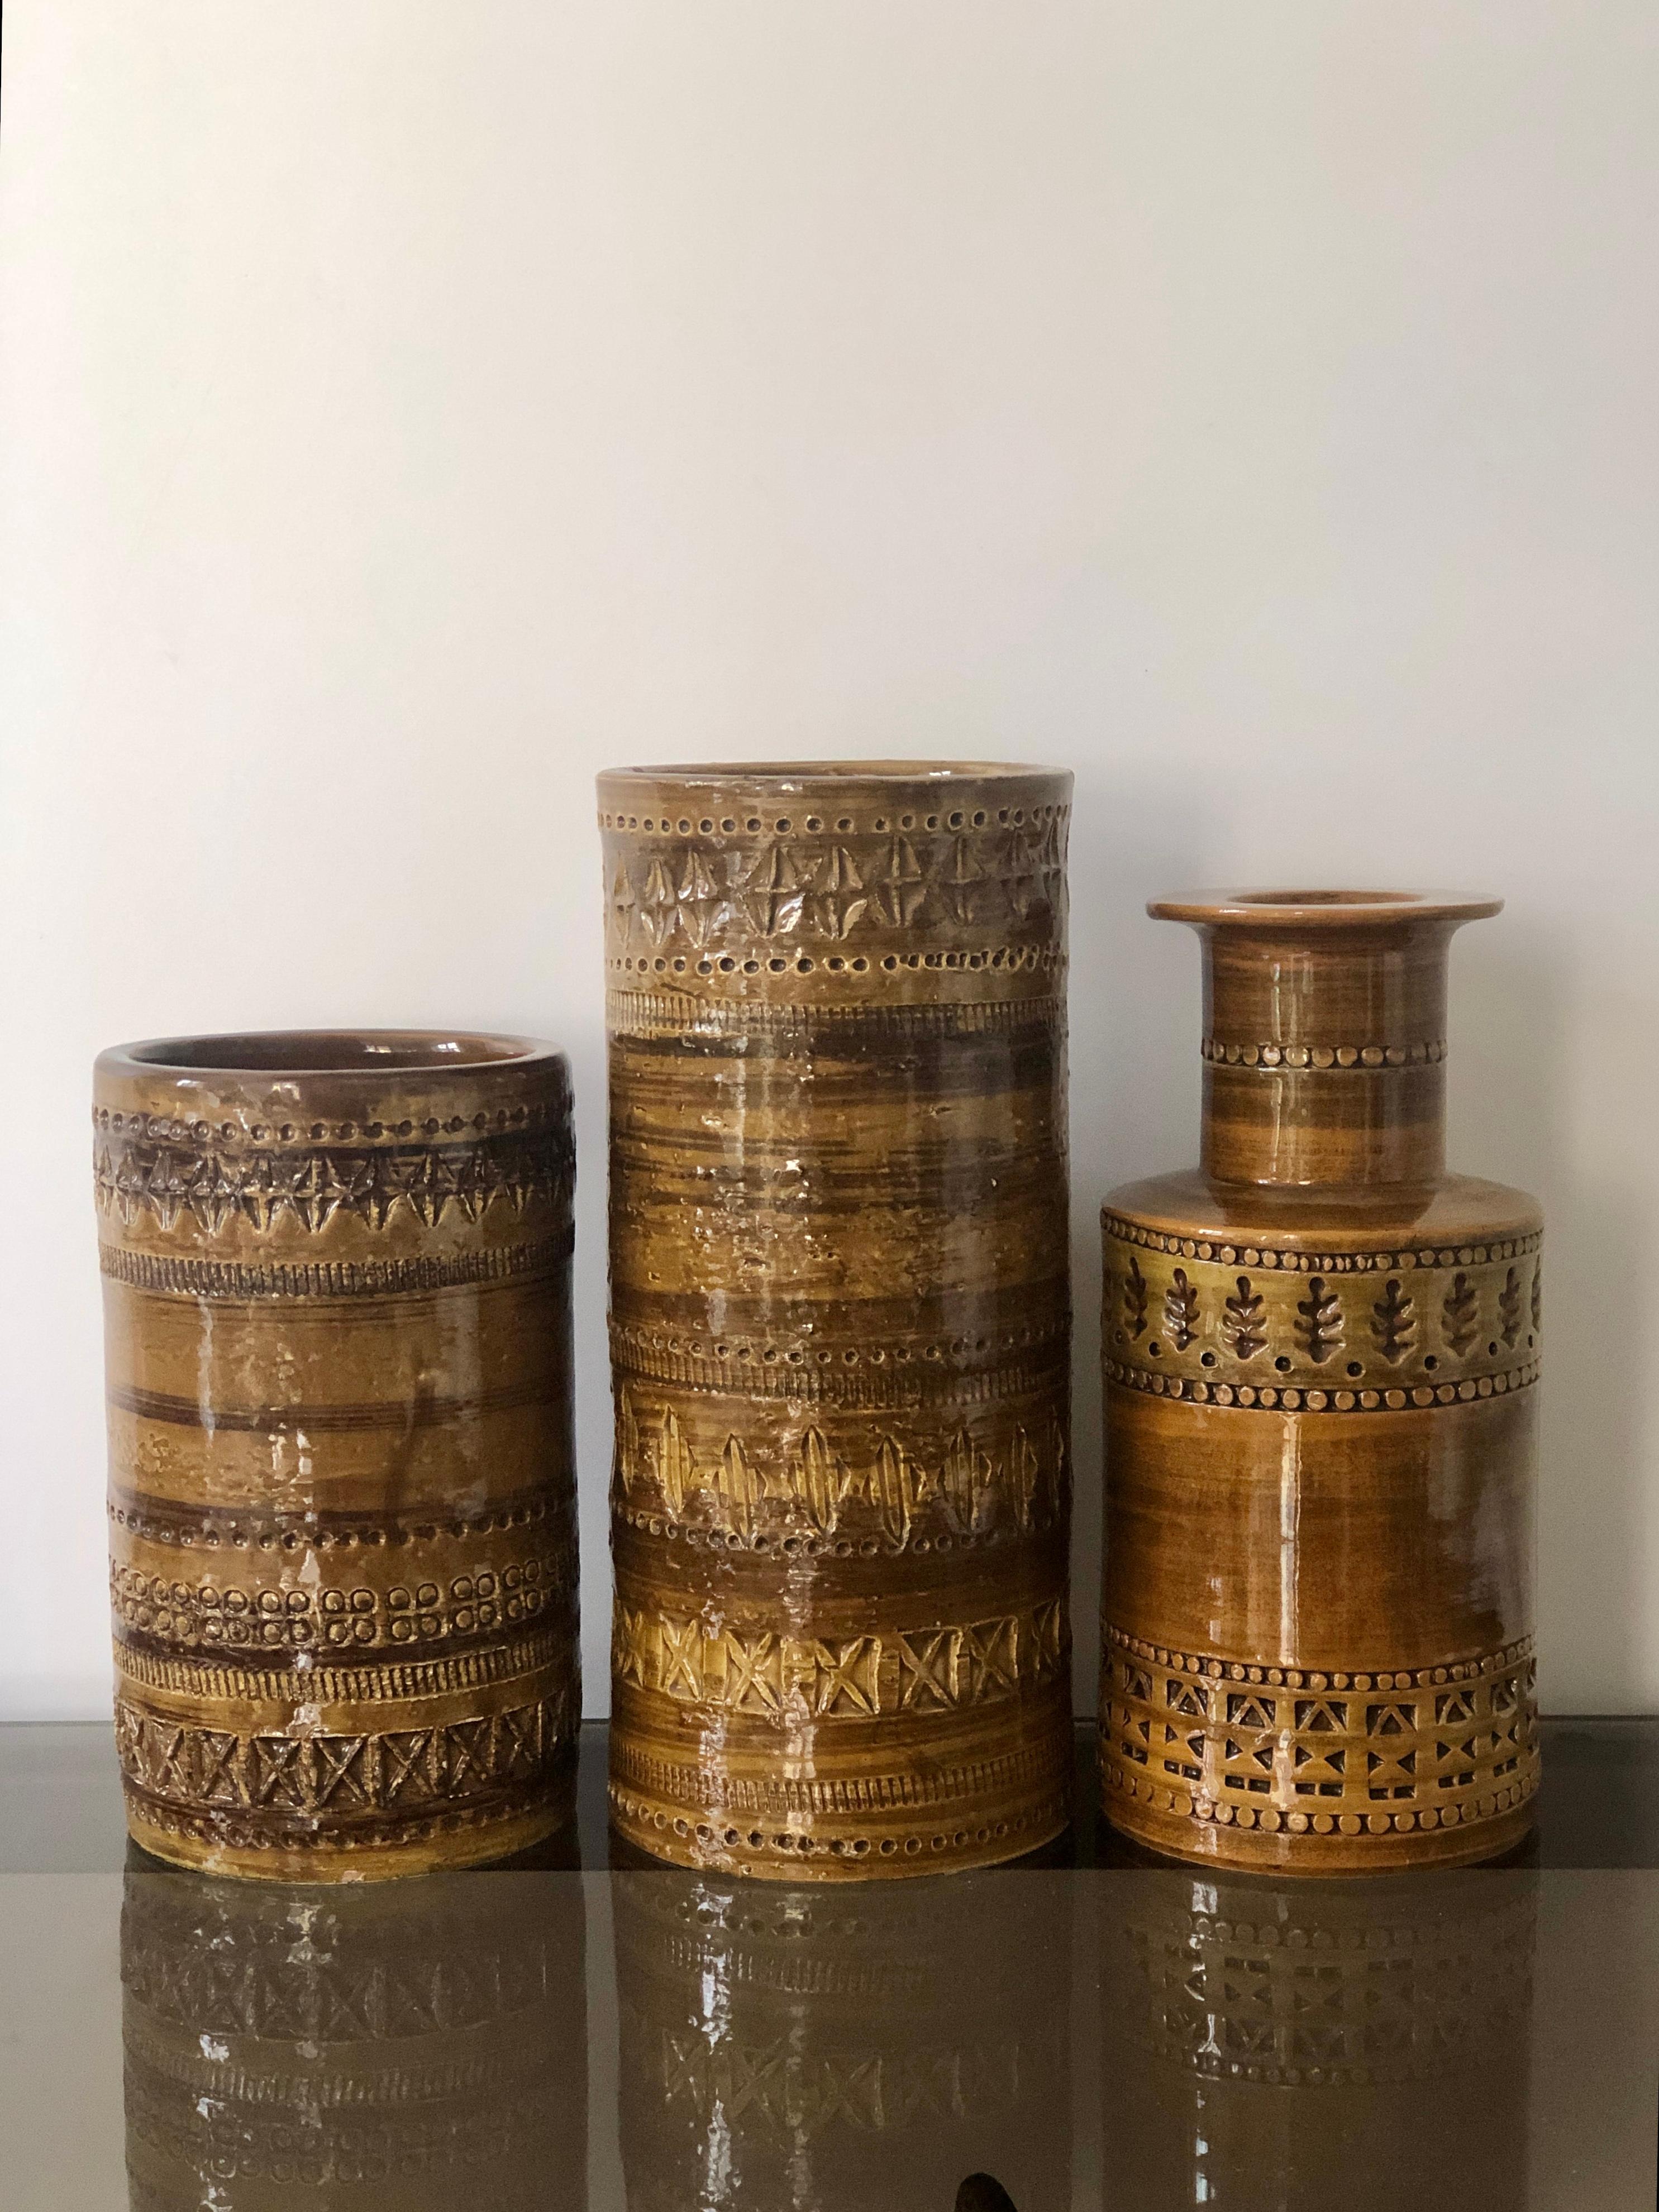 Set of 3 ceramic vases designed by Aldo Londi and manufactured by Bitossi, Italy in the 1960s. Mustard colored with strokes of brown and engraved geometric patterns. Good vintage condition with minor wear to glaze as seen in image. 
The golden